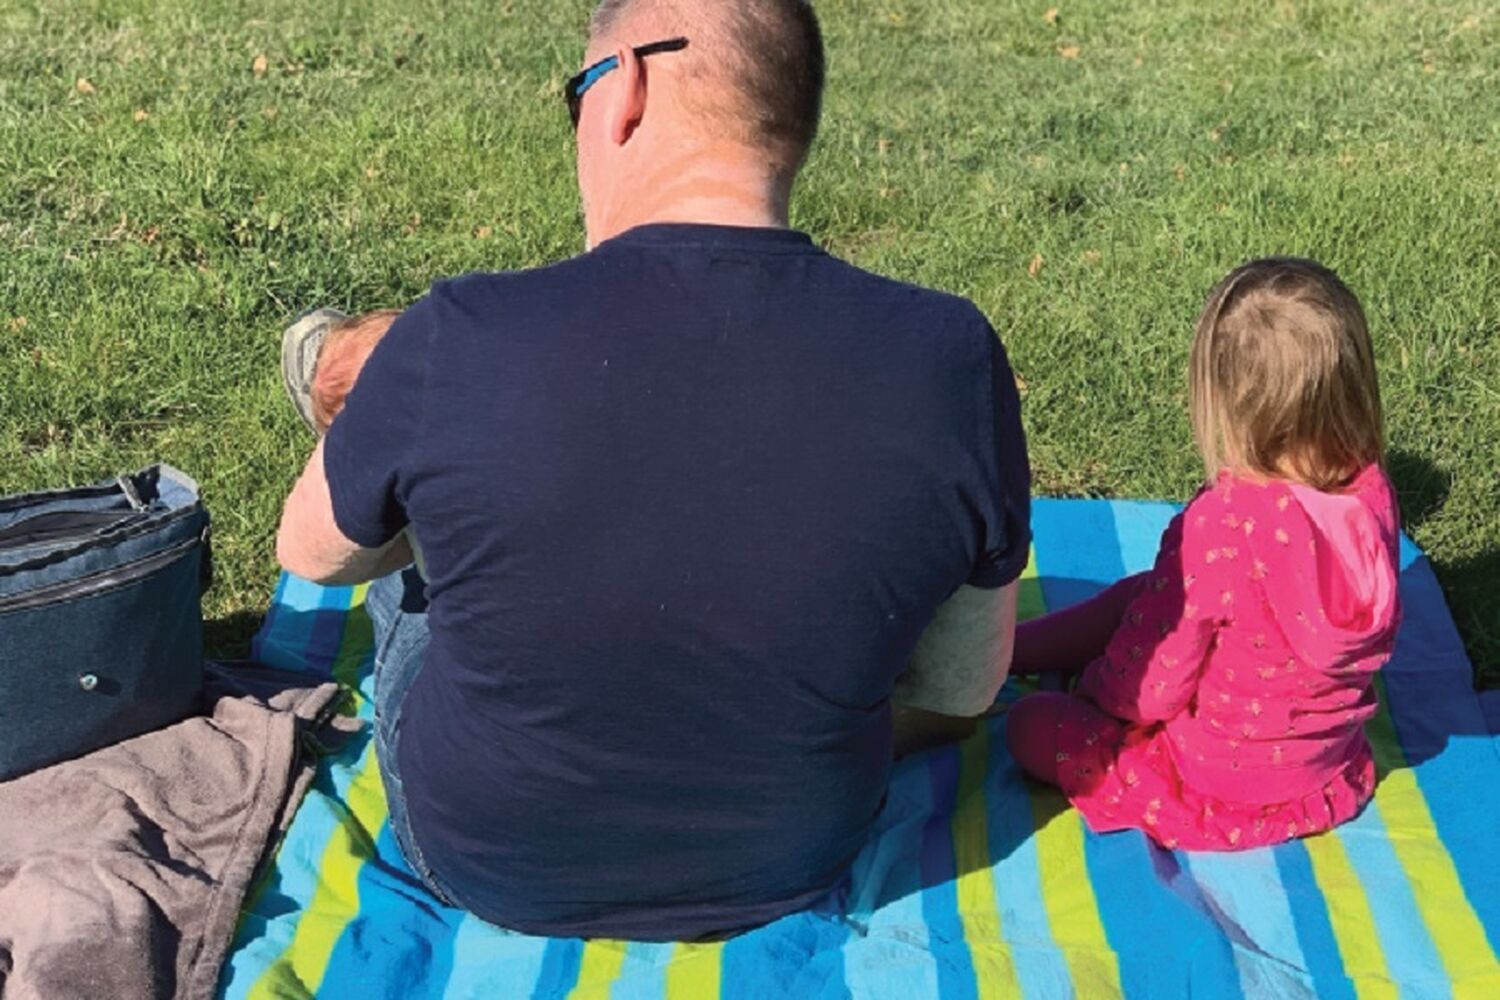 Dad Sitting With Baby In Arms And Child On A Picnic Rug